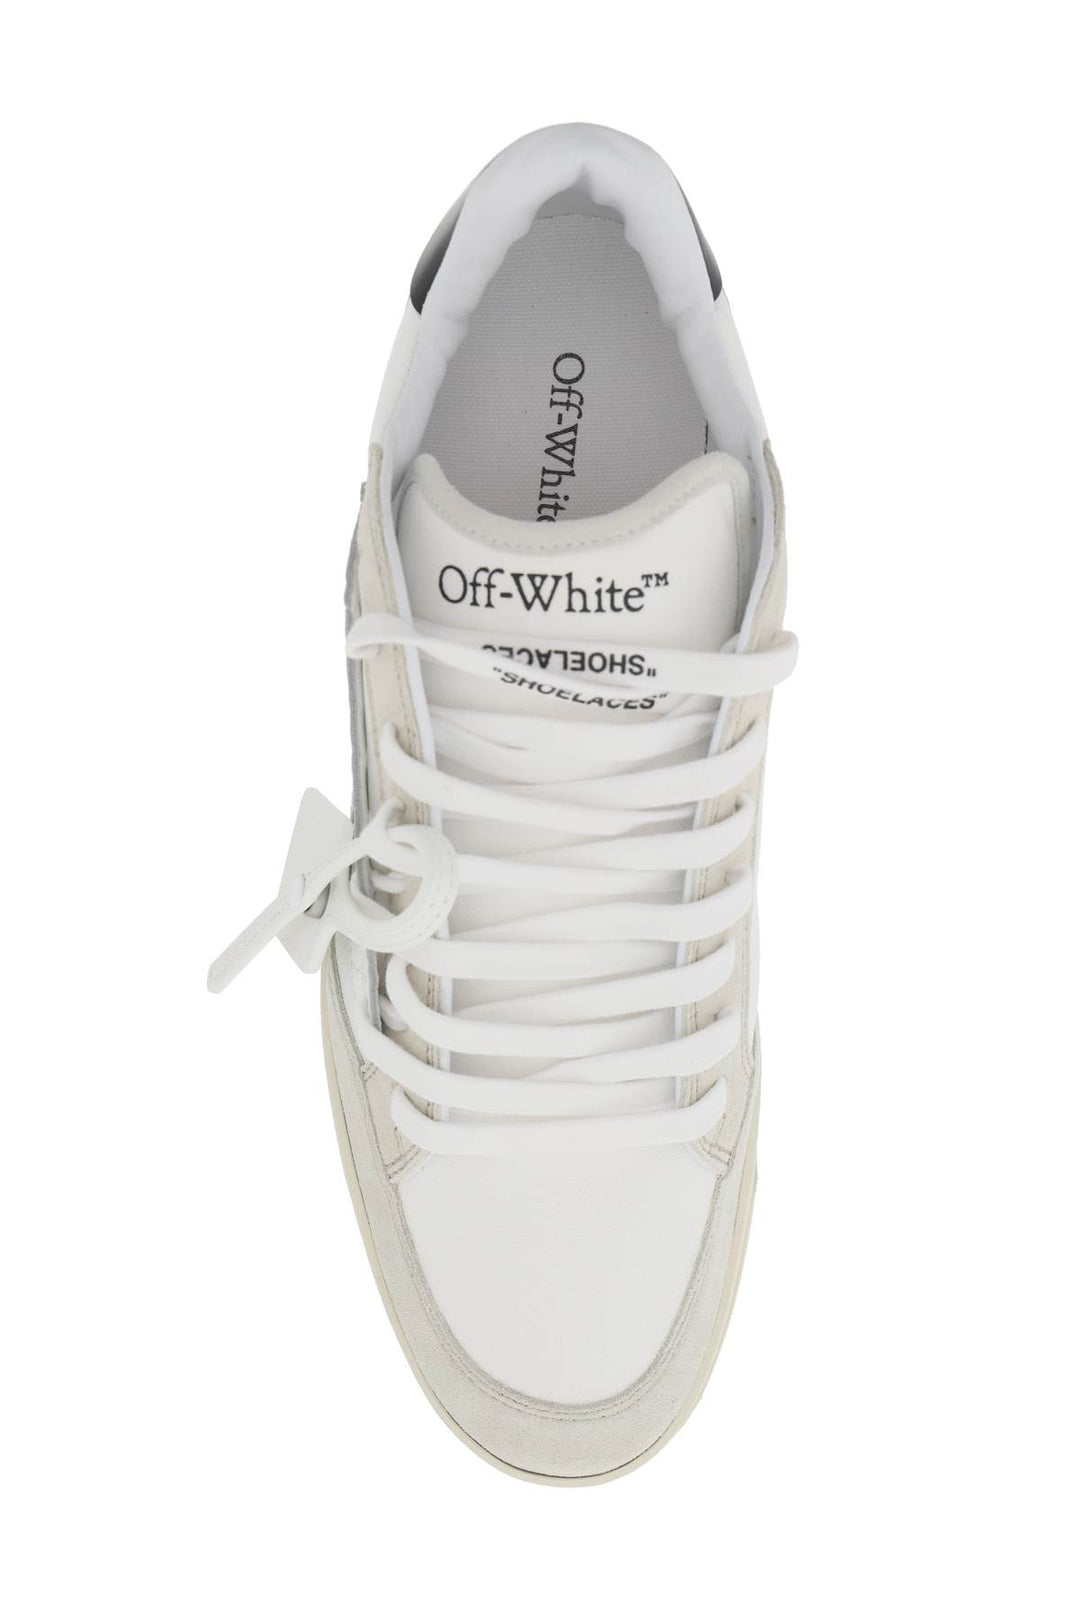 Off White 5.0 Sneakers   Bianco